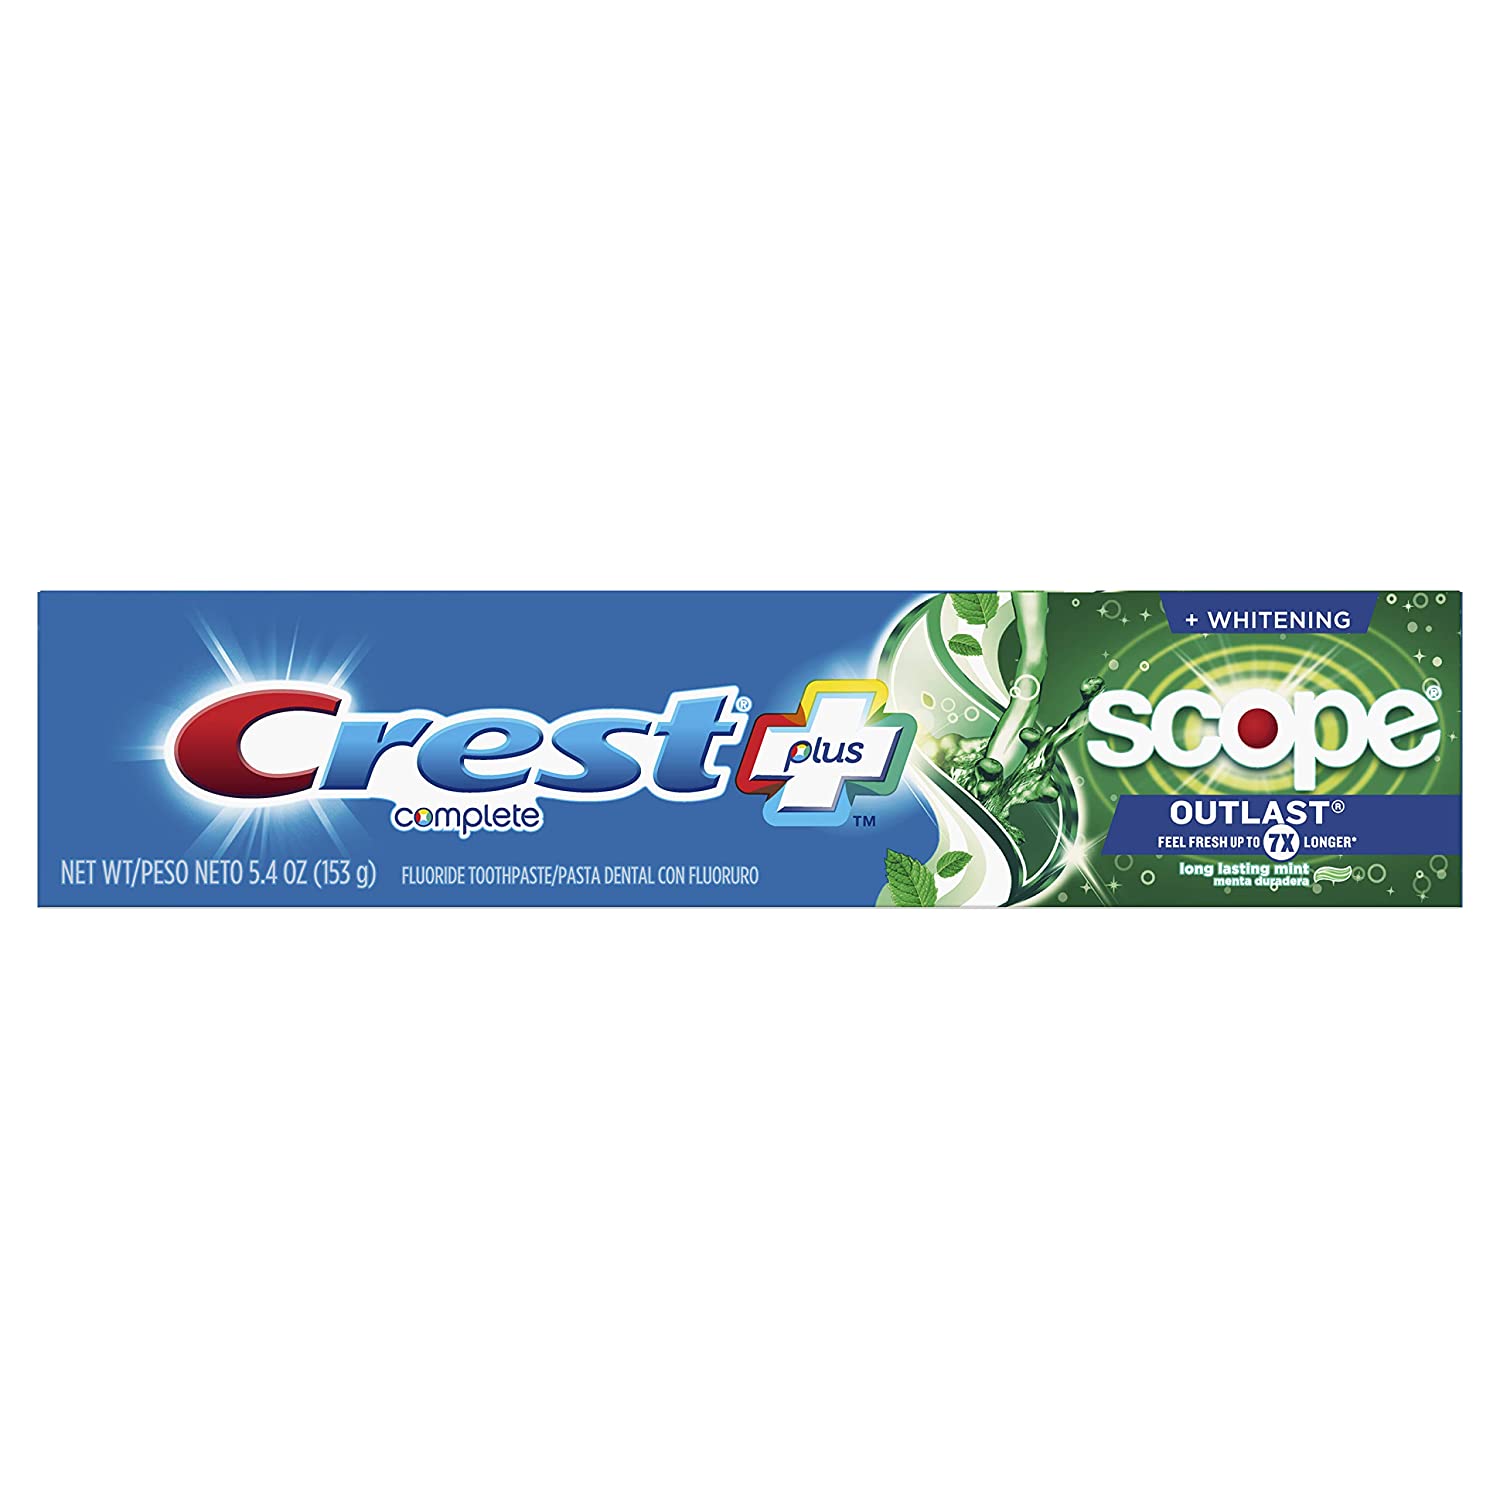 Crest + Scope Outlast Complete Whitening Toothpaste, Mint, 5.4 oz*